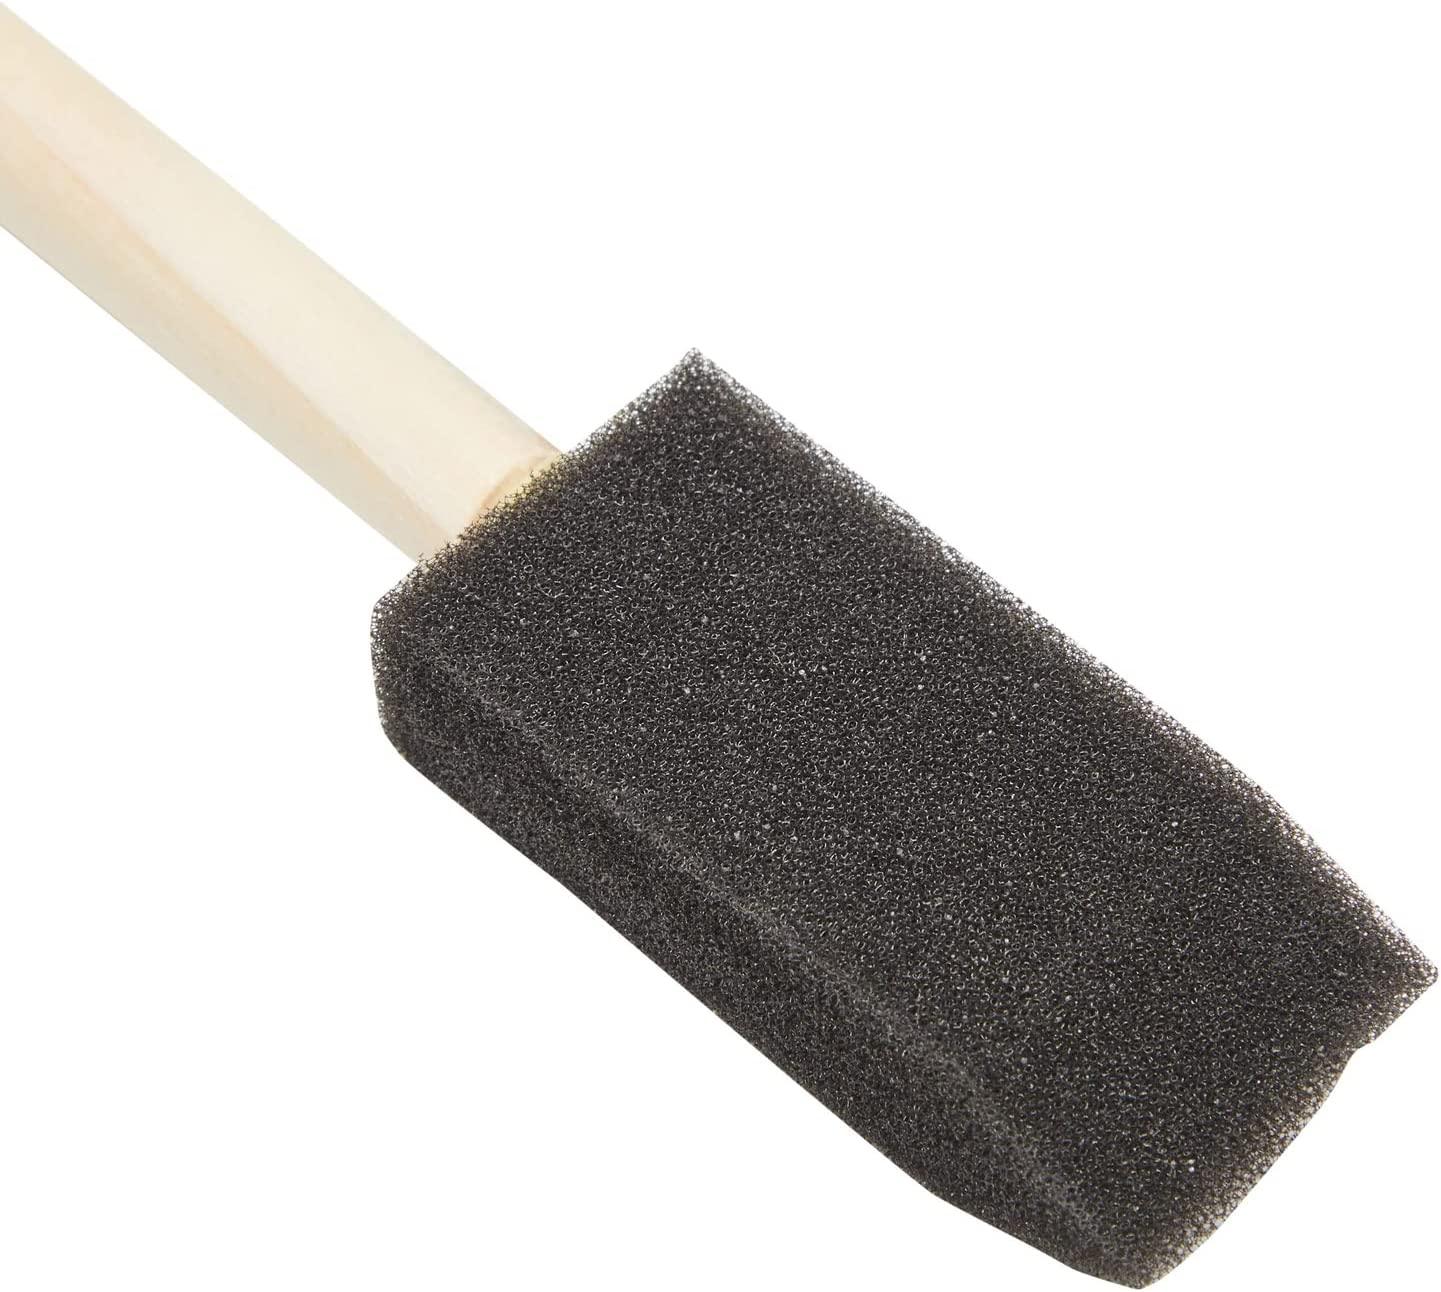 1 Inch Foam Brushes for Painting, Crafts, Mod Podge, Wood Stain (120 Pack) - Lasercutwraps Shop